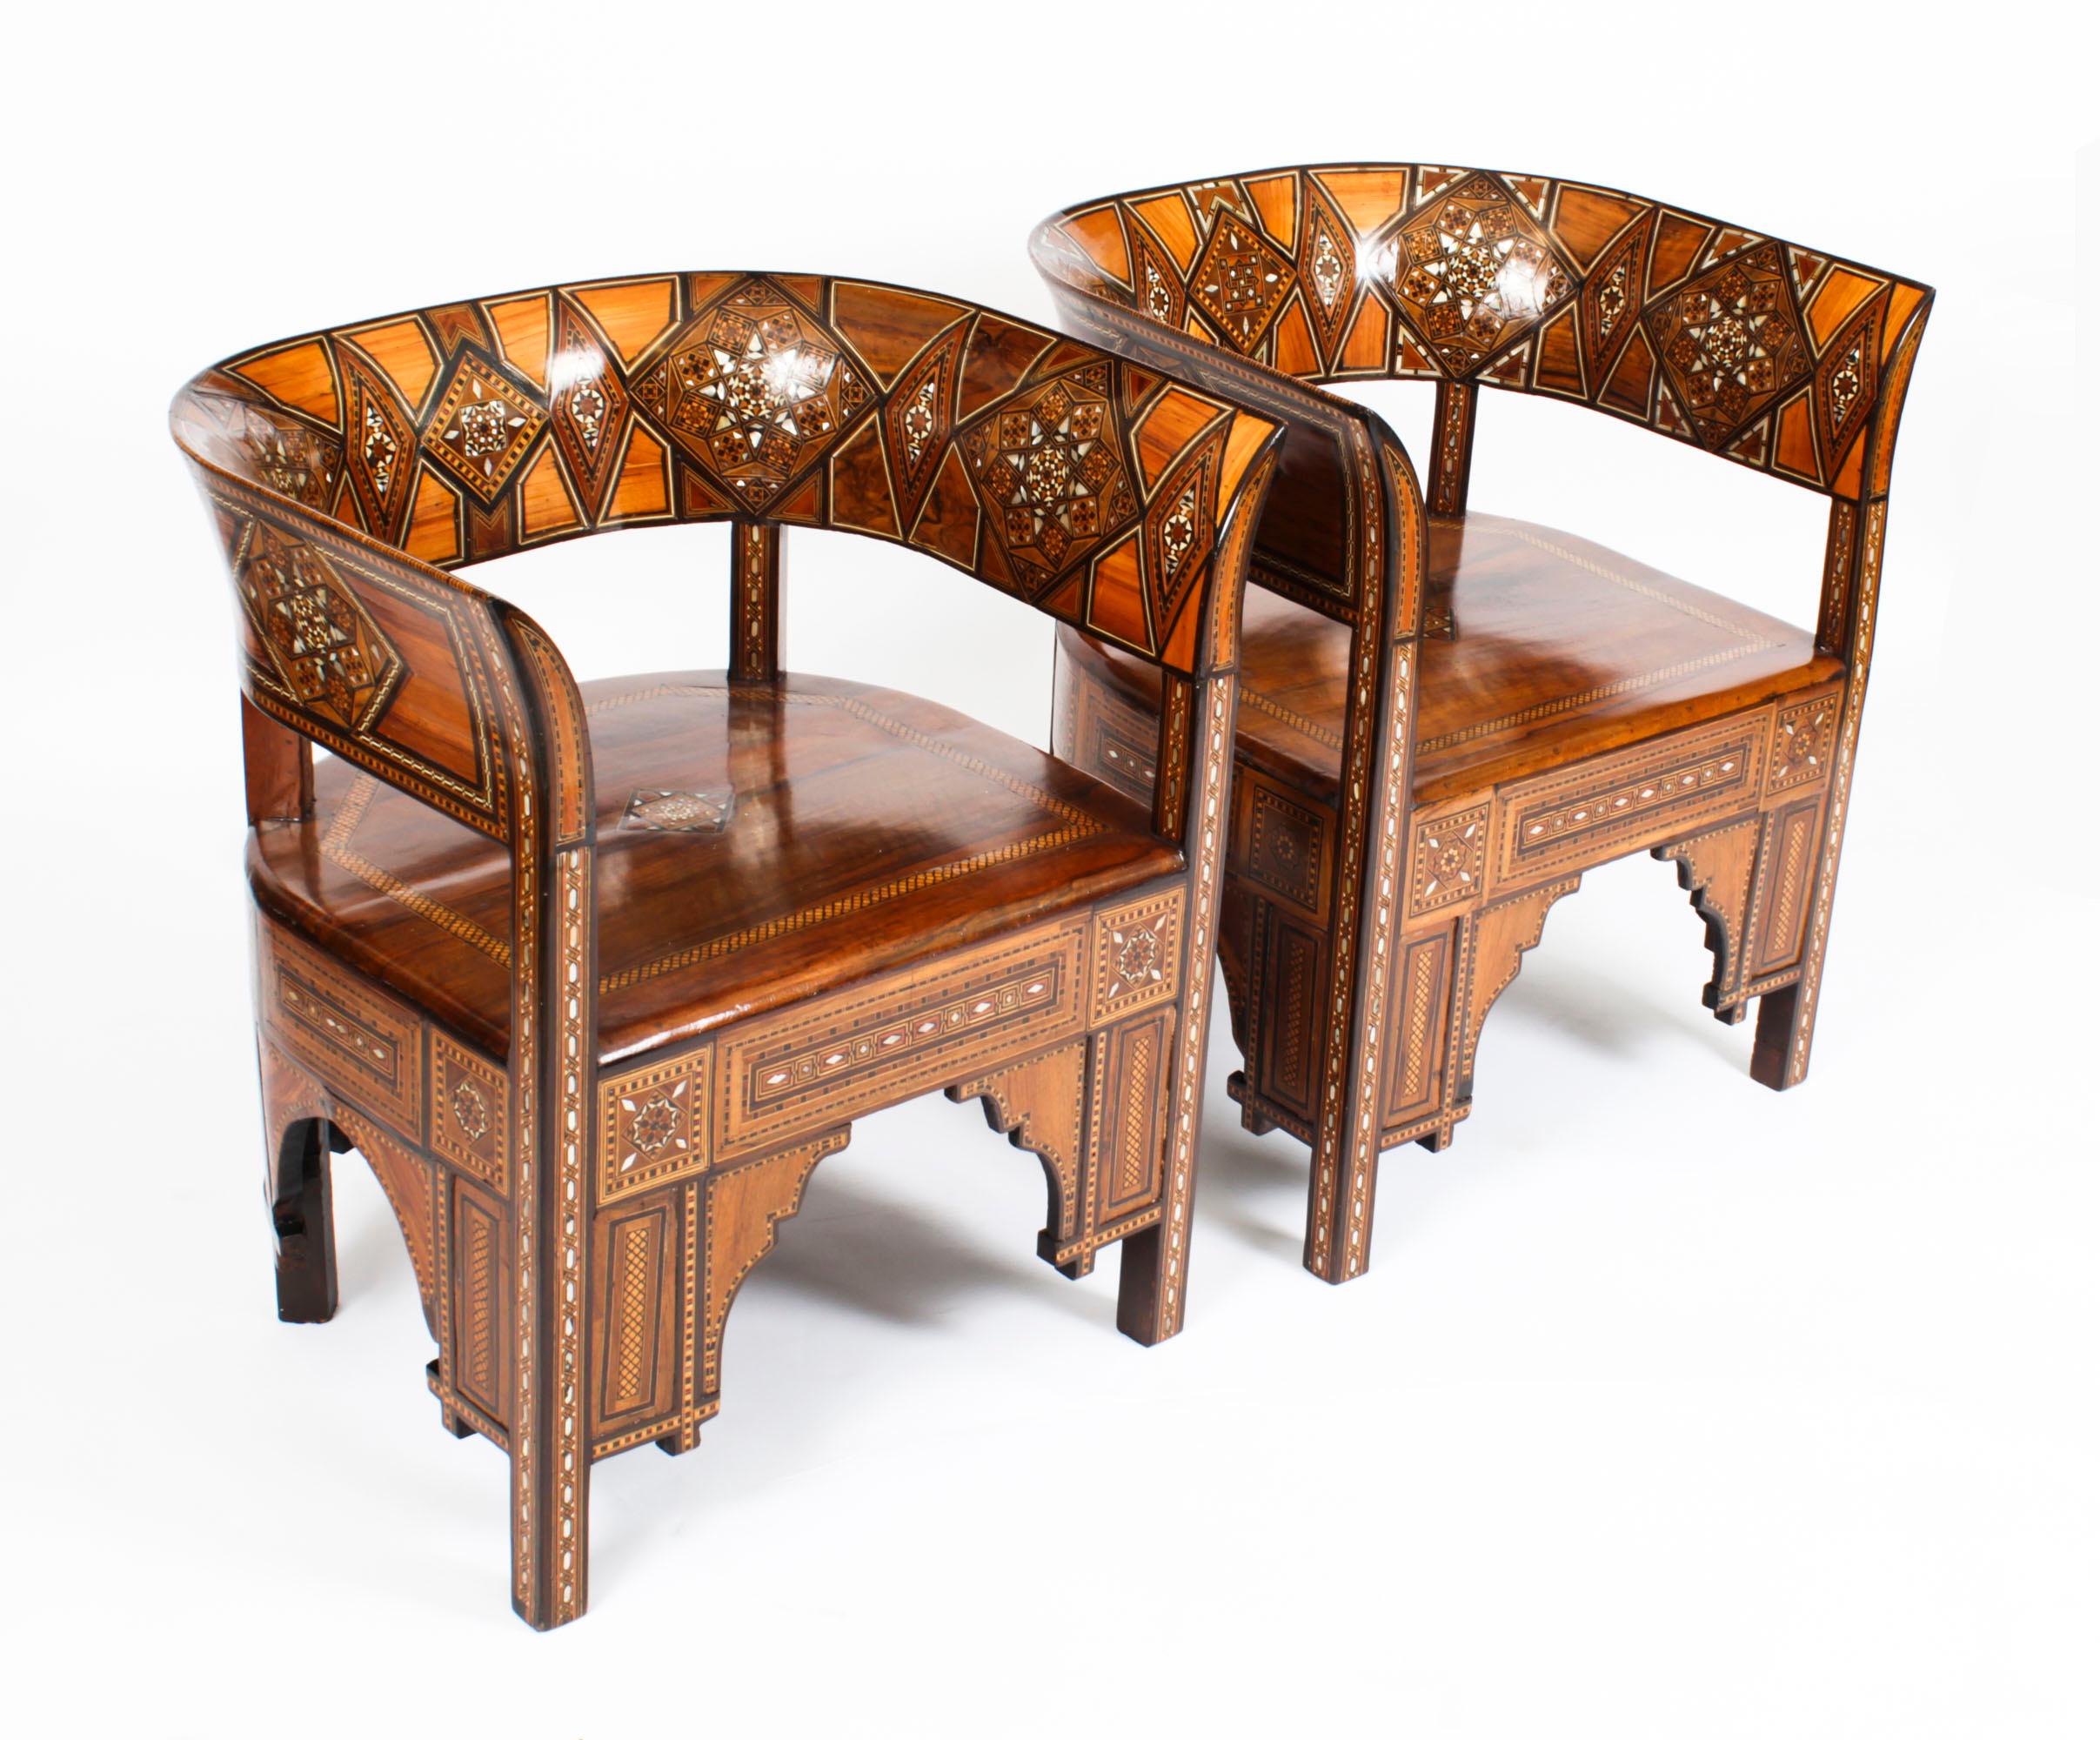 A superb pair of syrian damascus armchairs, circa 1880 in date.
 
The stunning pair of parquetry armchairs have been exquisitely crafted in hardwood with wonderful inlaid decoration comprising, ebony, walnut, and various fruitwoods.
 
They